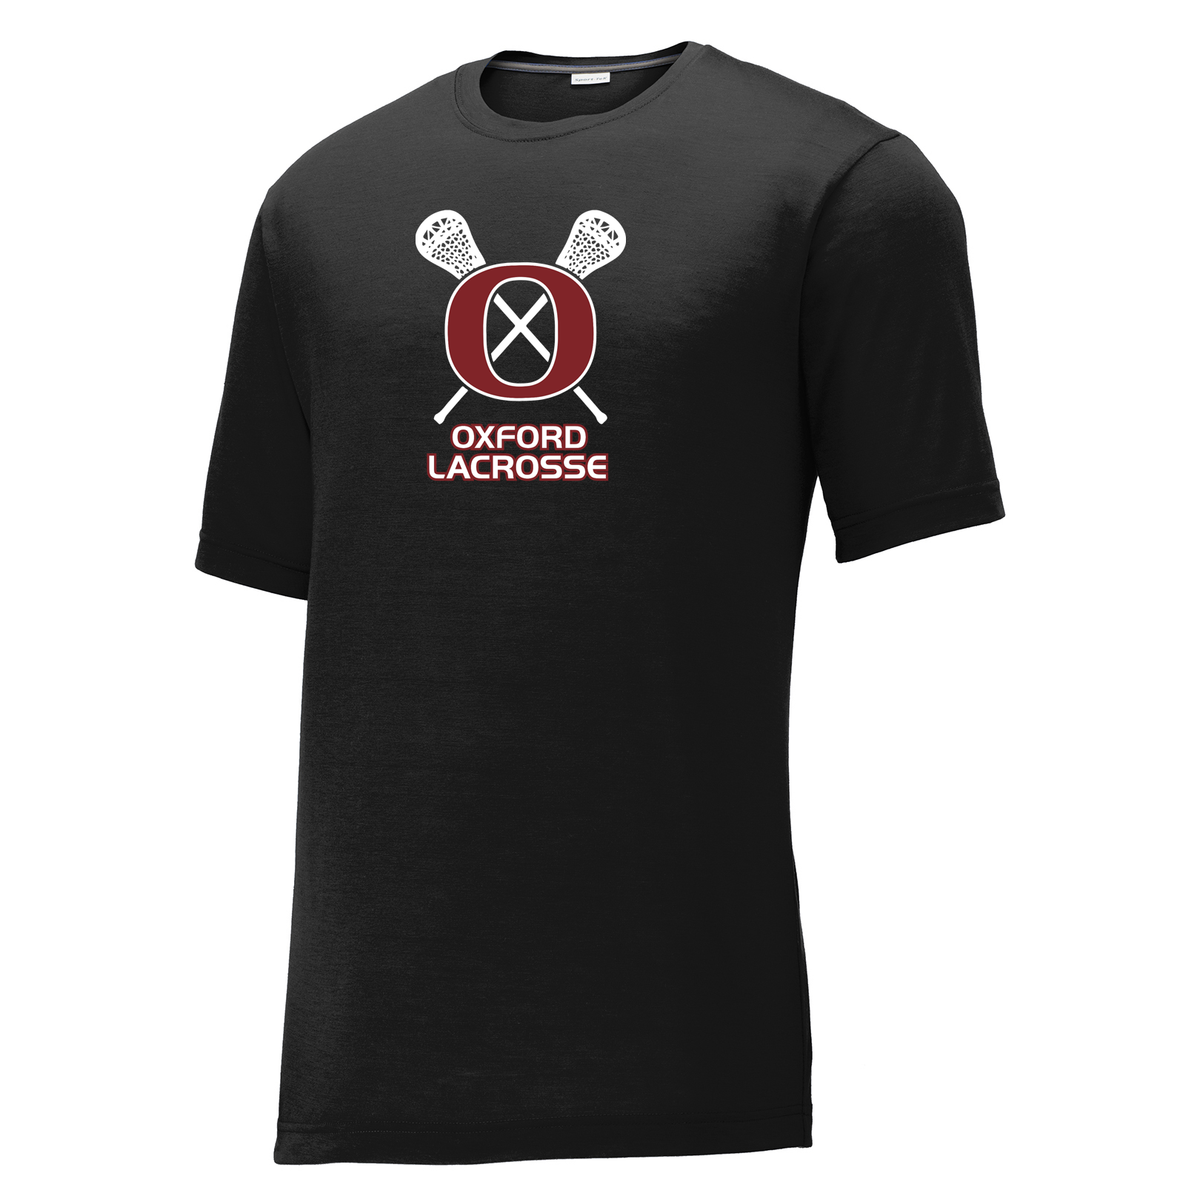 Oxford Youth Lacrosse Men's CottonTouch Performance T-Shirt